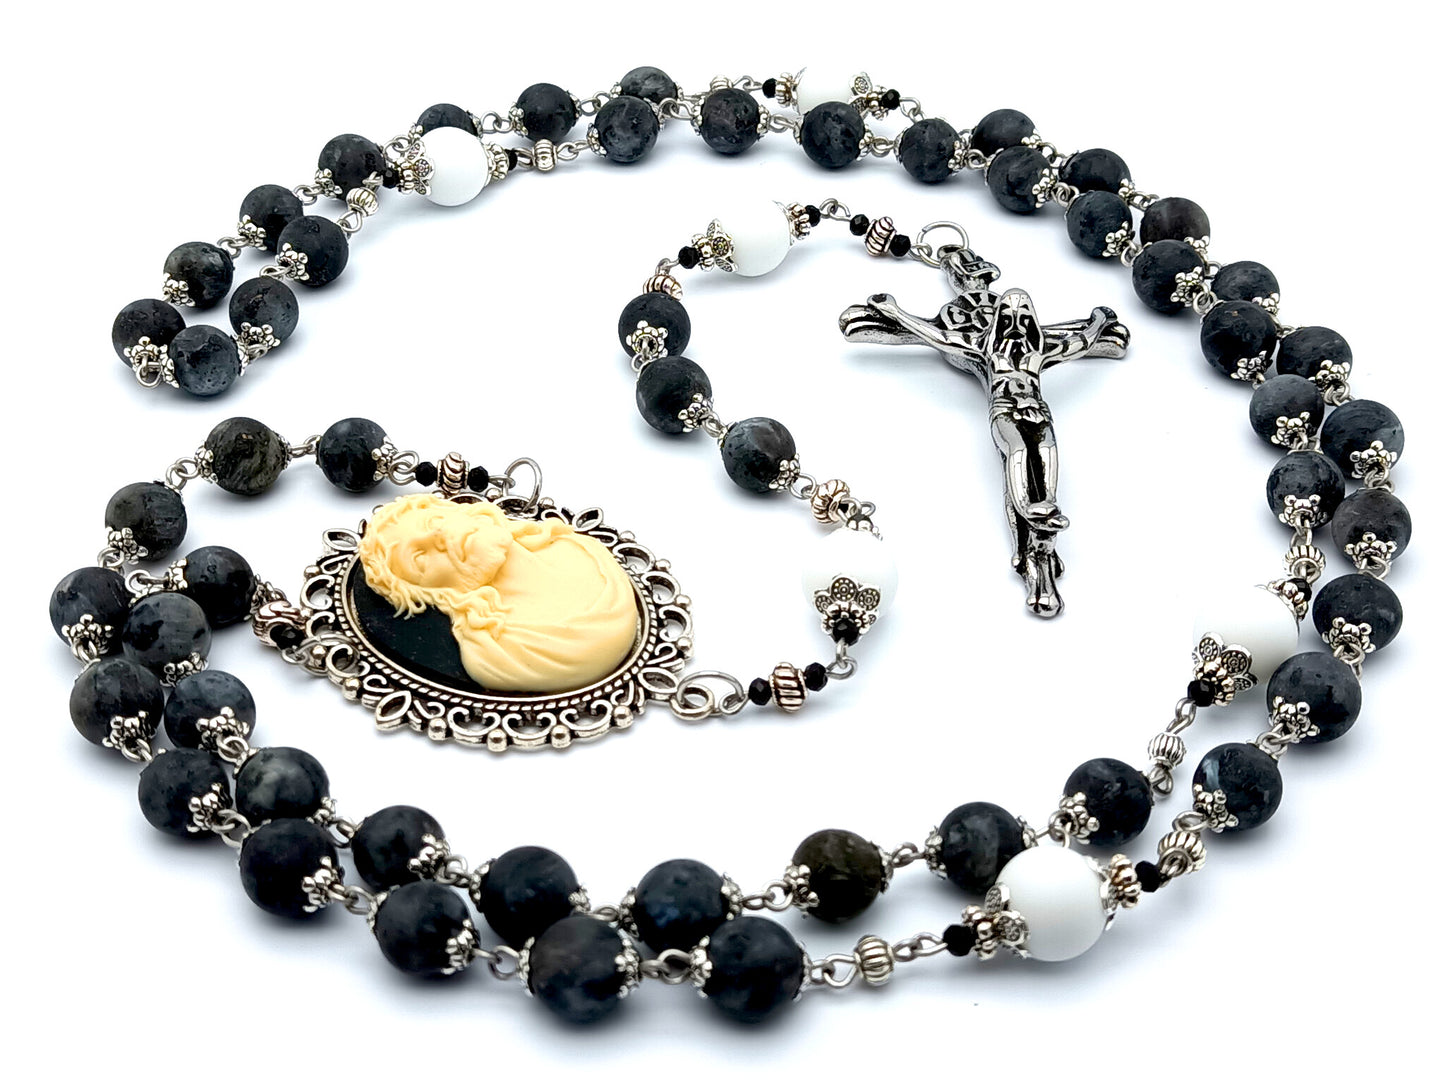 Ecce Homo 3D Jesus Crowning of Thorns cameo unique rosary beads with labradorite and alabaster gemstone beads and large stainless steel crucifix.